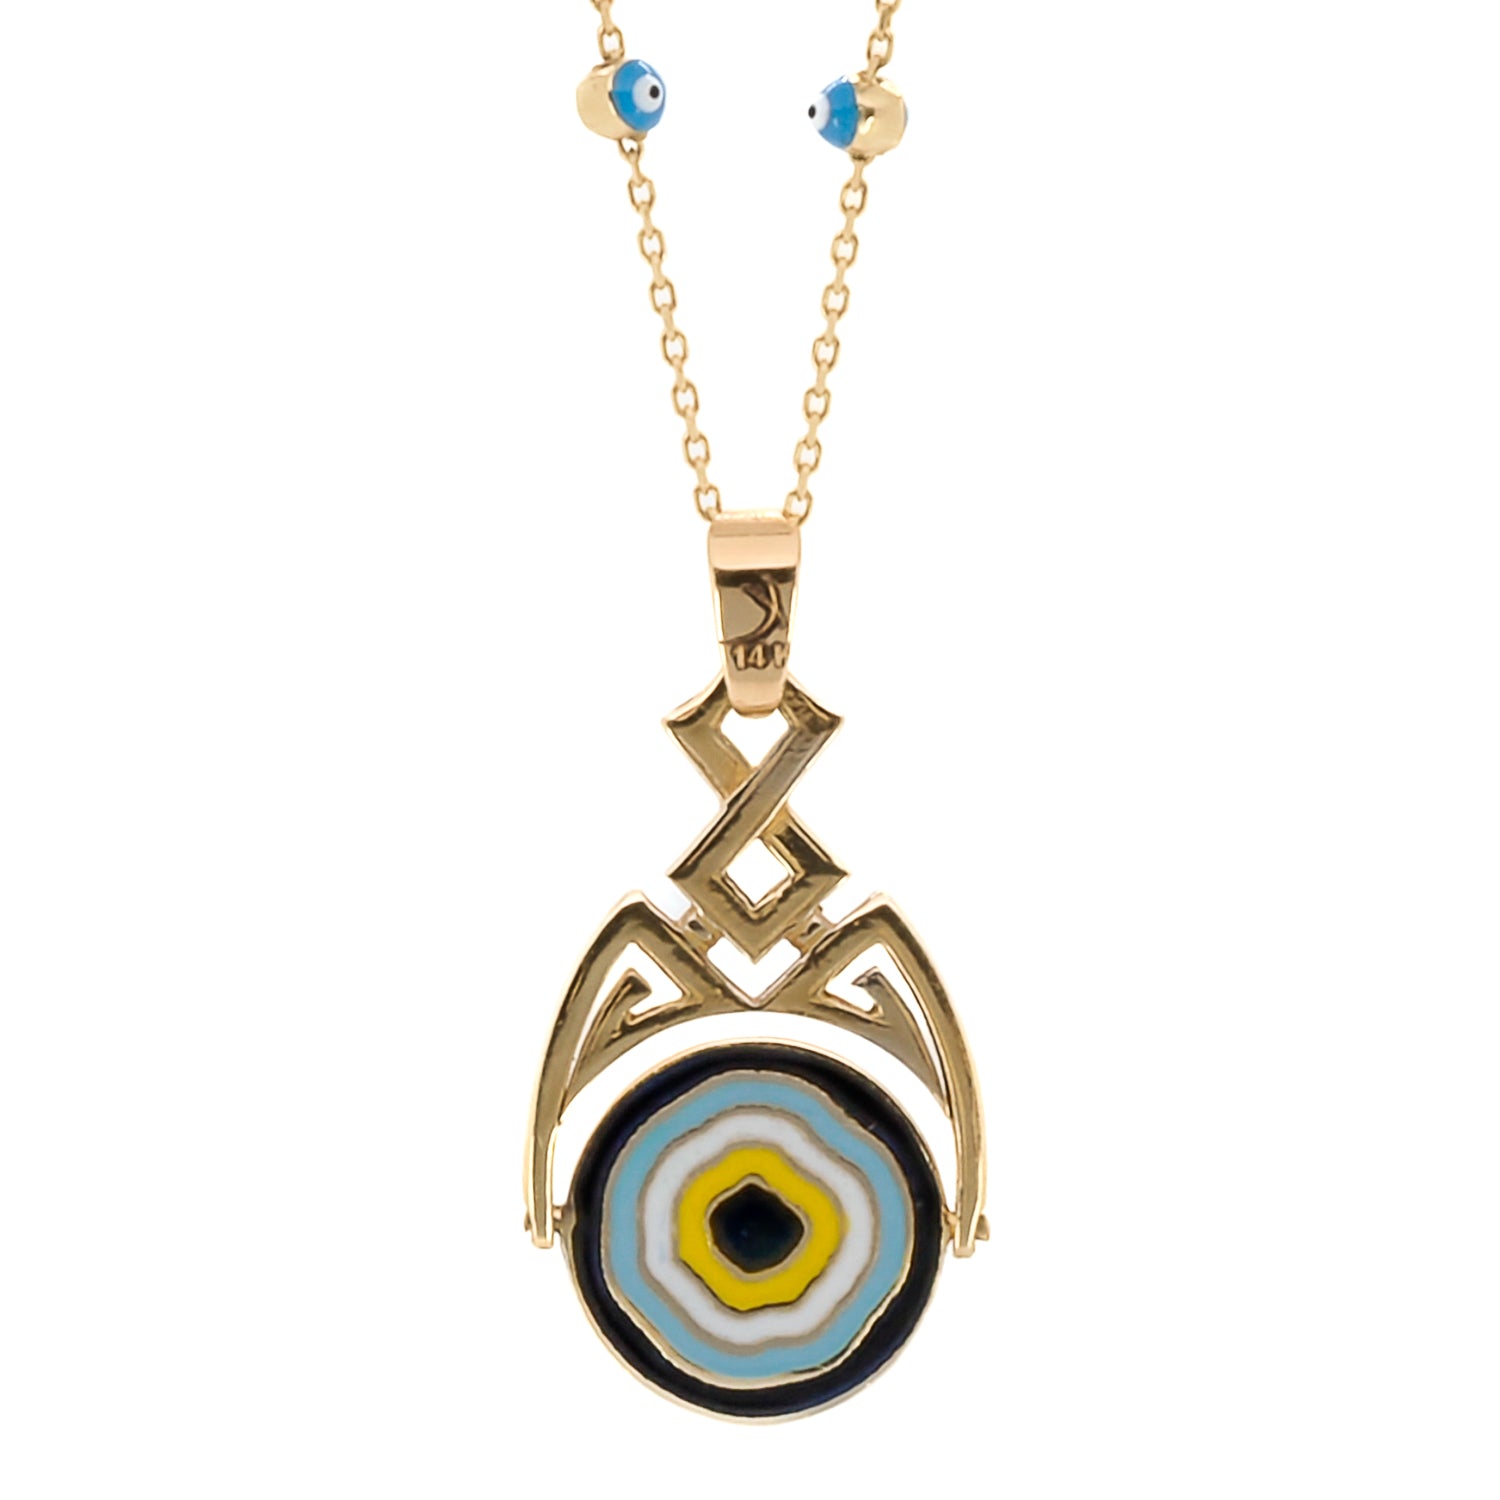 Gold and Diamond Evil Eye Necklace - A beautiful piece of jewelry crafted from 14k yellow gold, showcasing a lucky Evil Eye pendant with sparkling diamonds and vibrant enamel.